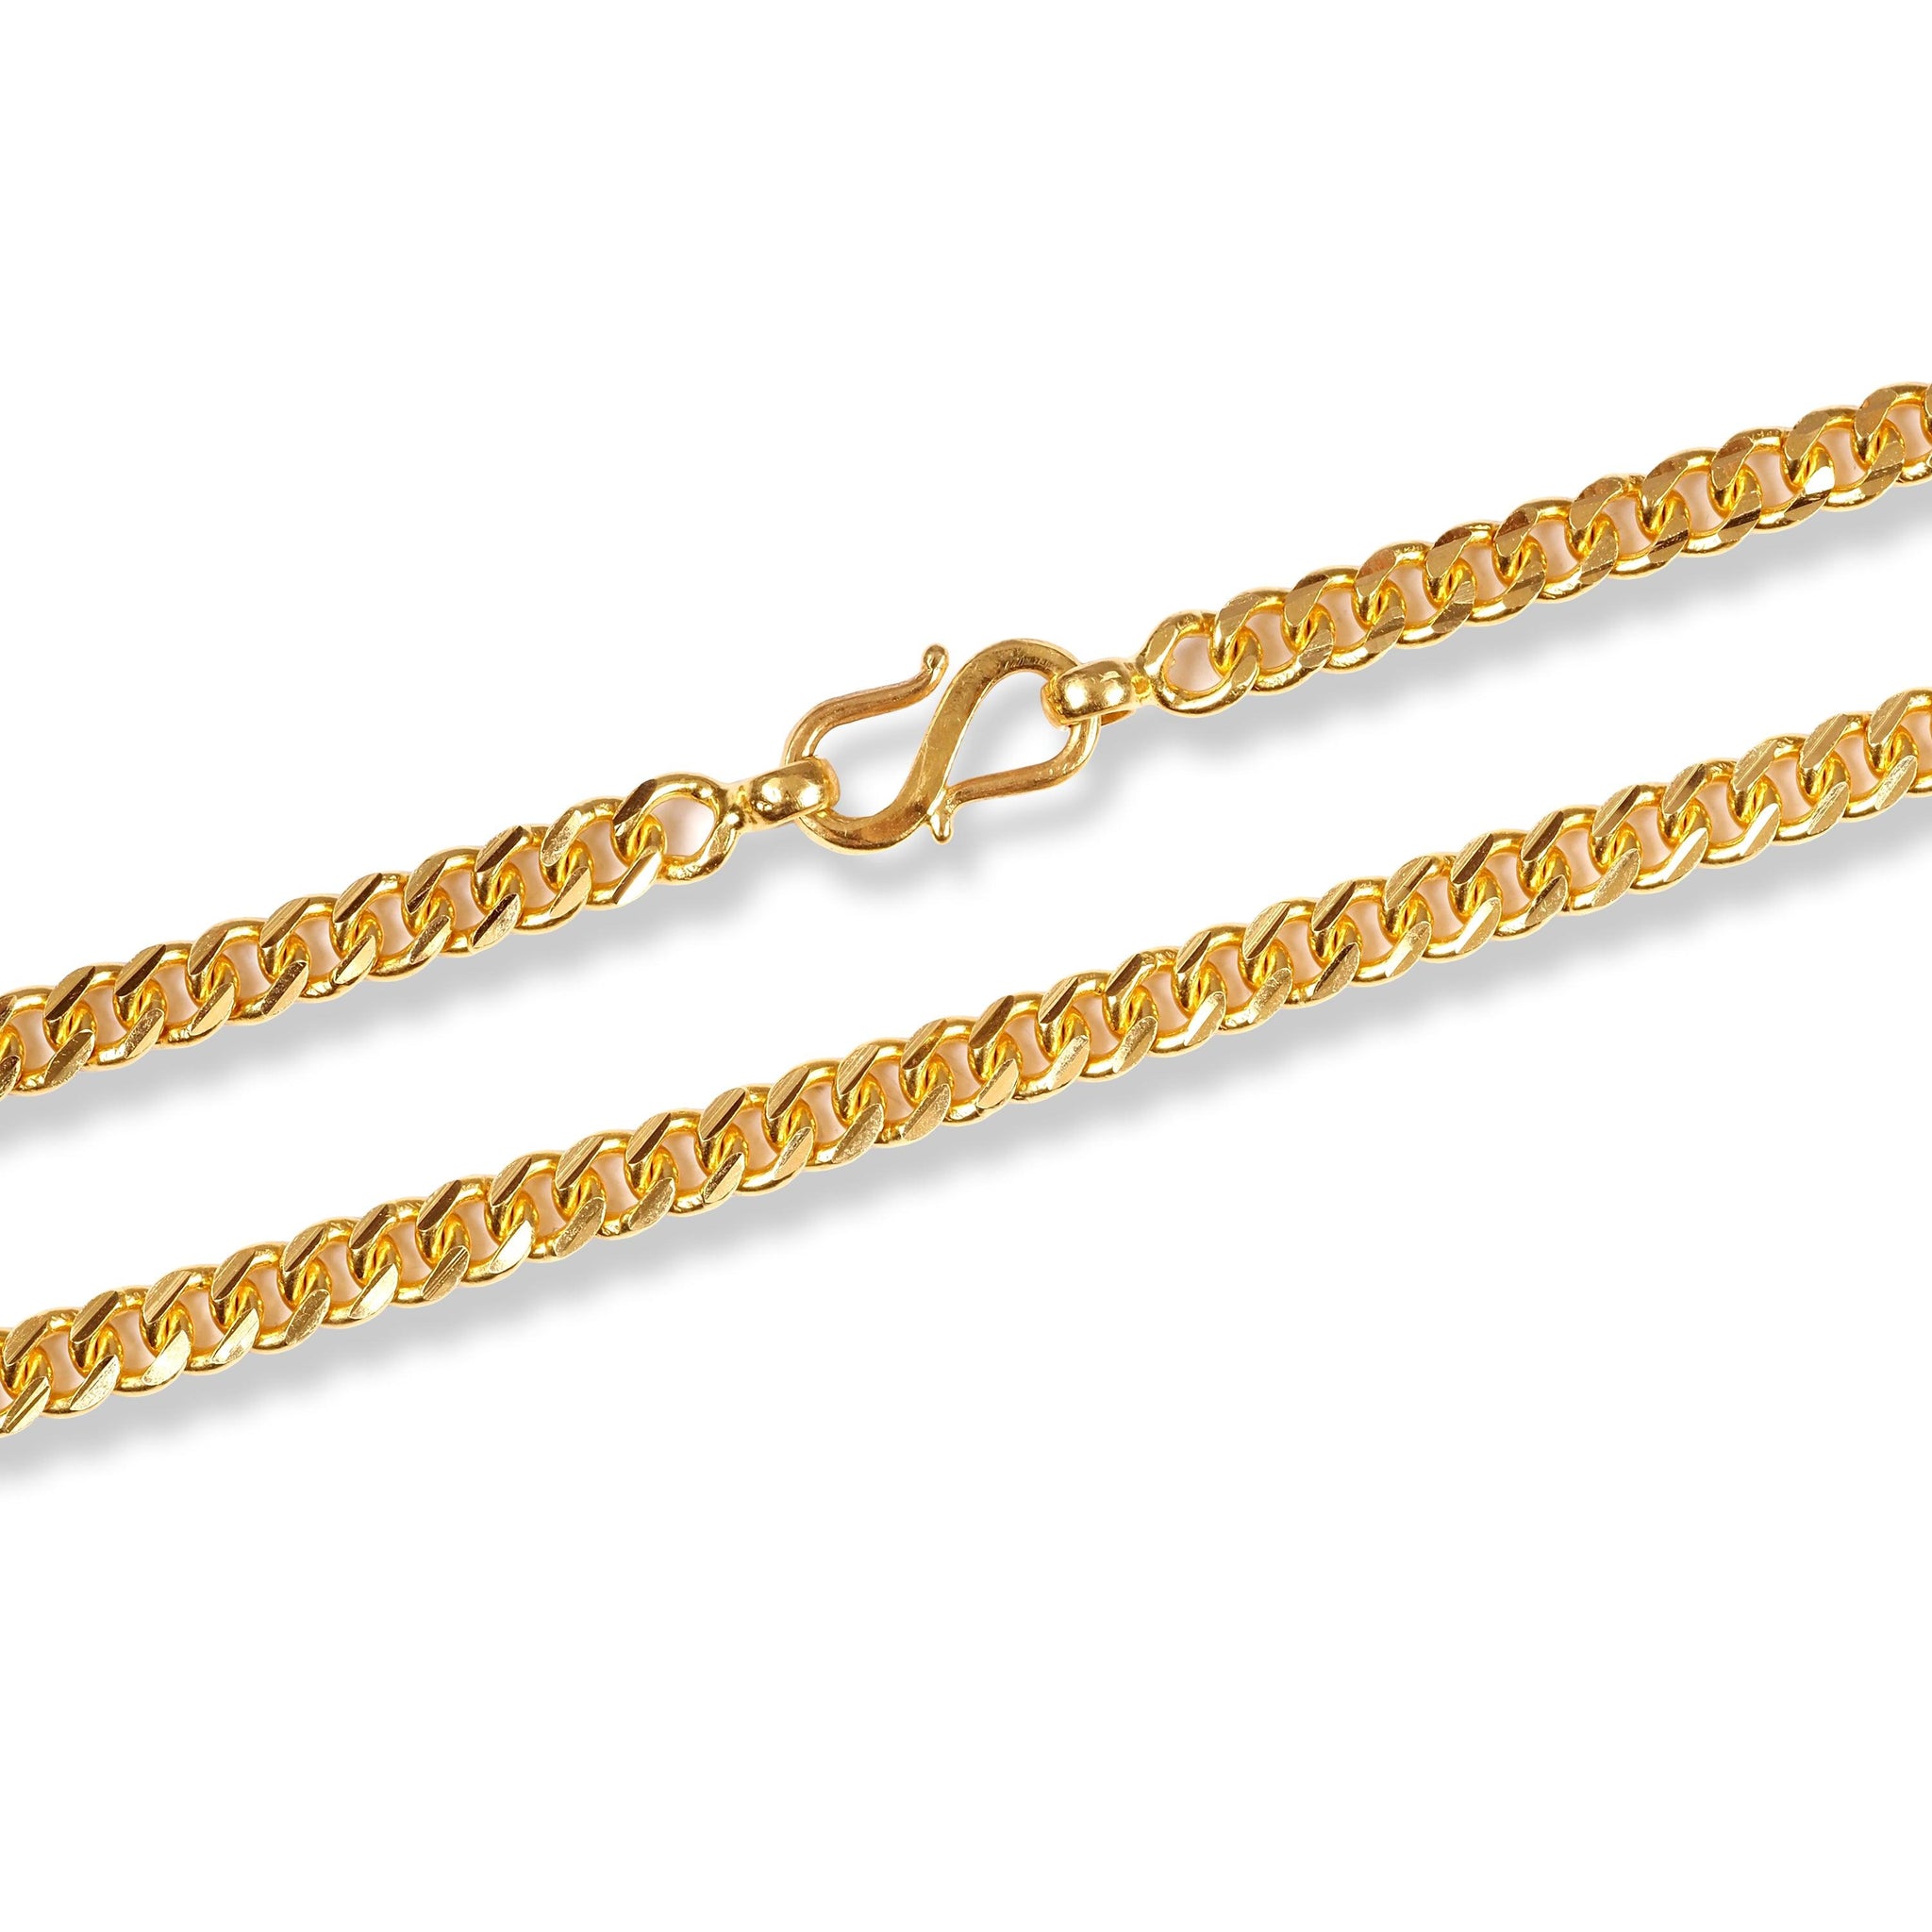 22ct Yellow Gold Classic Curb Link Chain with S Clasp C-1218